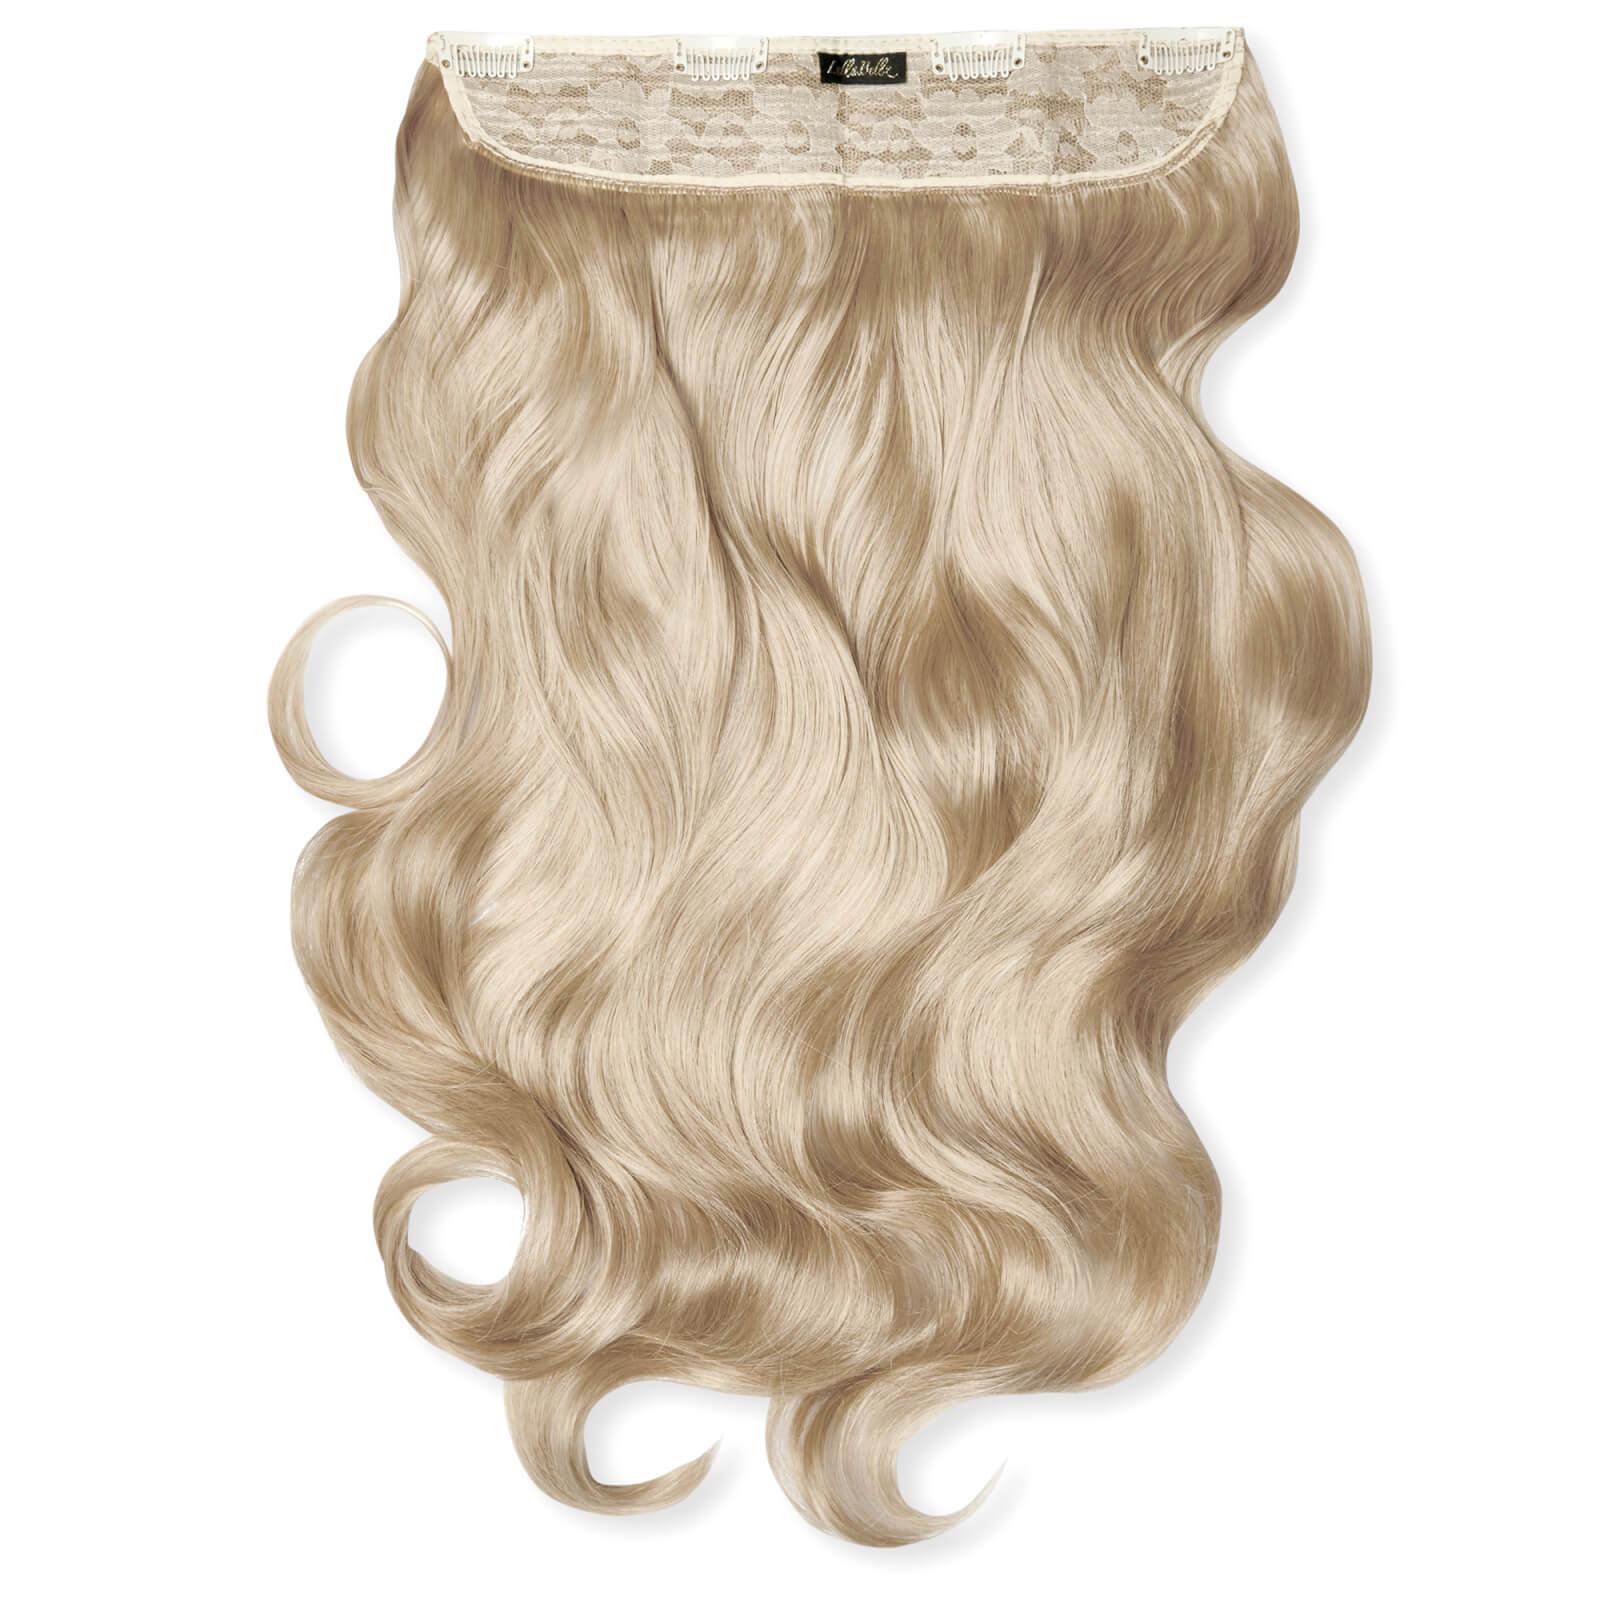 LullaBellz Thick 20 1-Piece Curly Clip in Hair Extensions (Various Colours) - California Blonde von Lullabellz